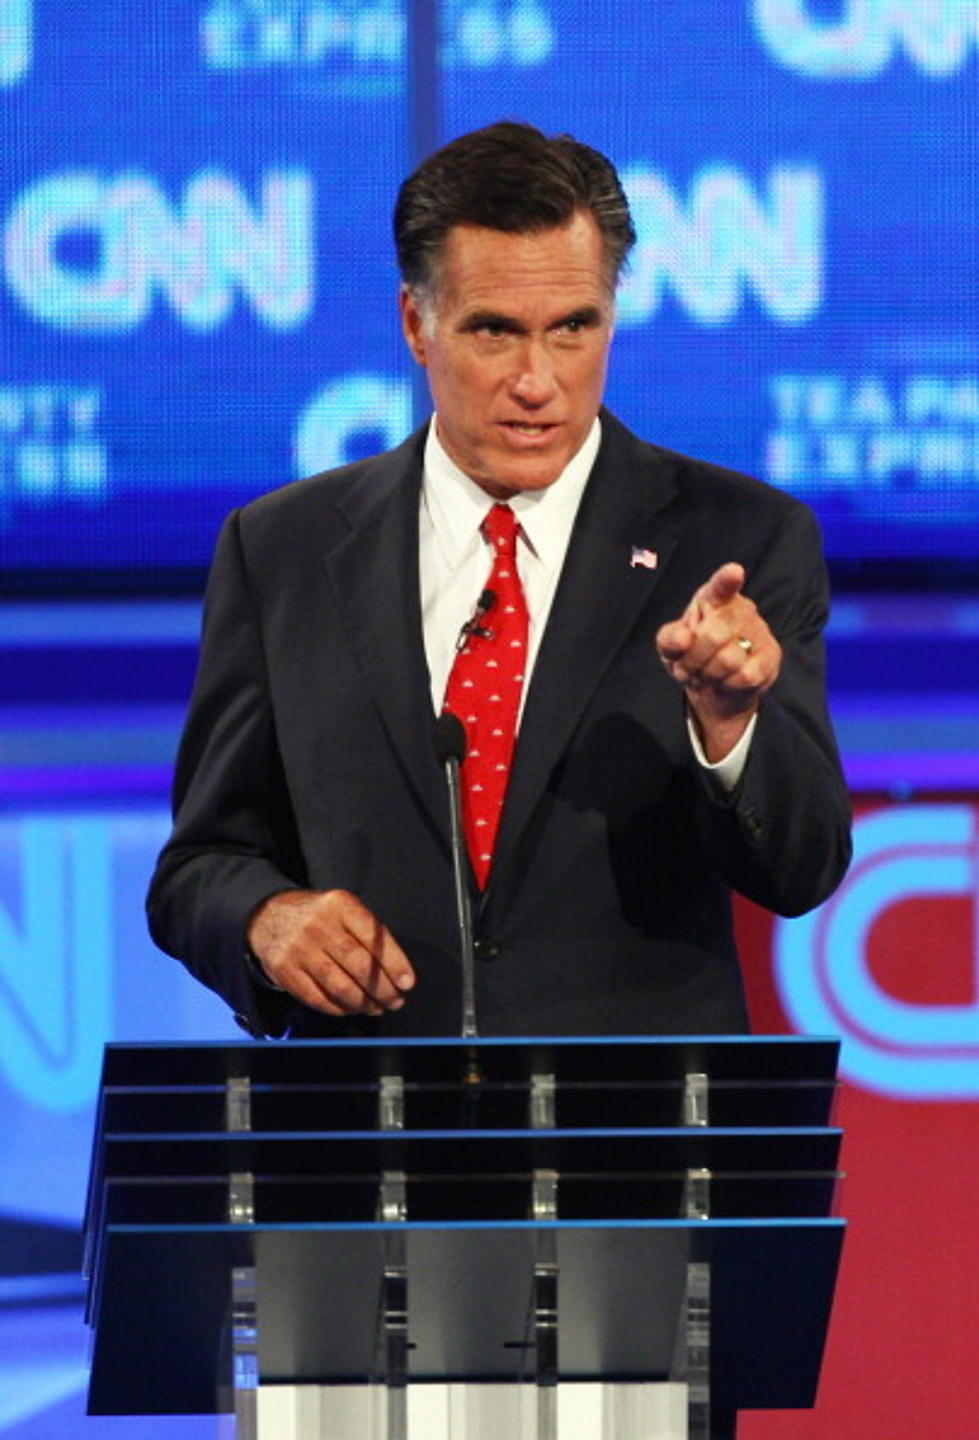 Is Romney Really a Conservative?